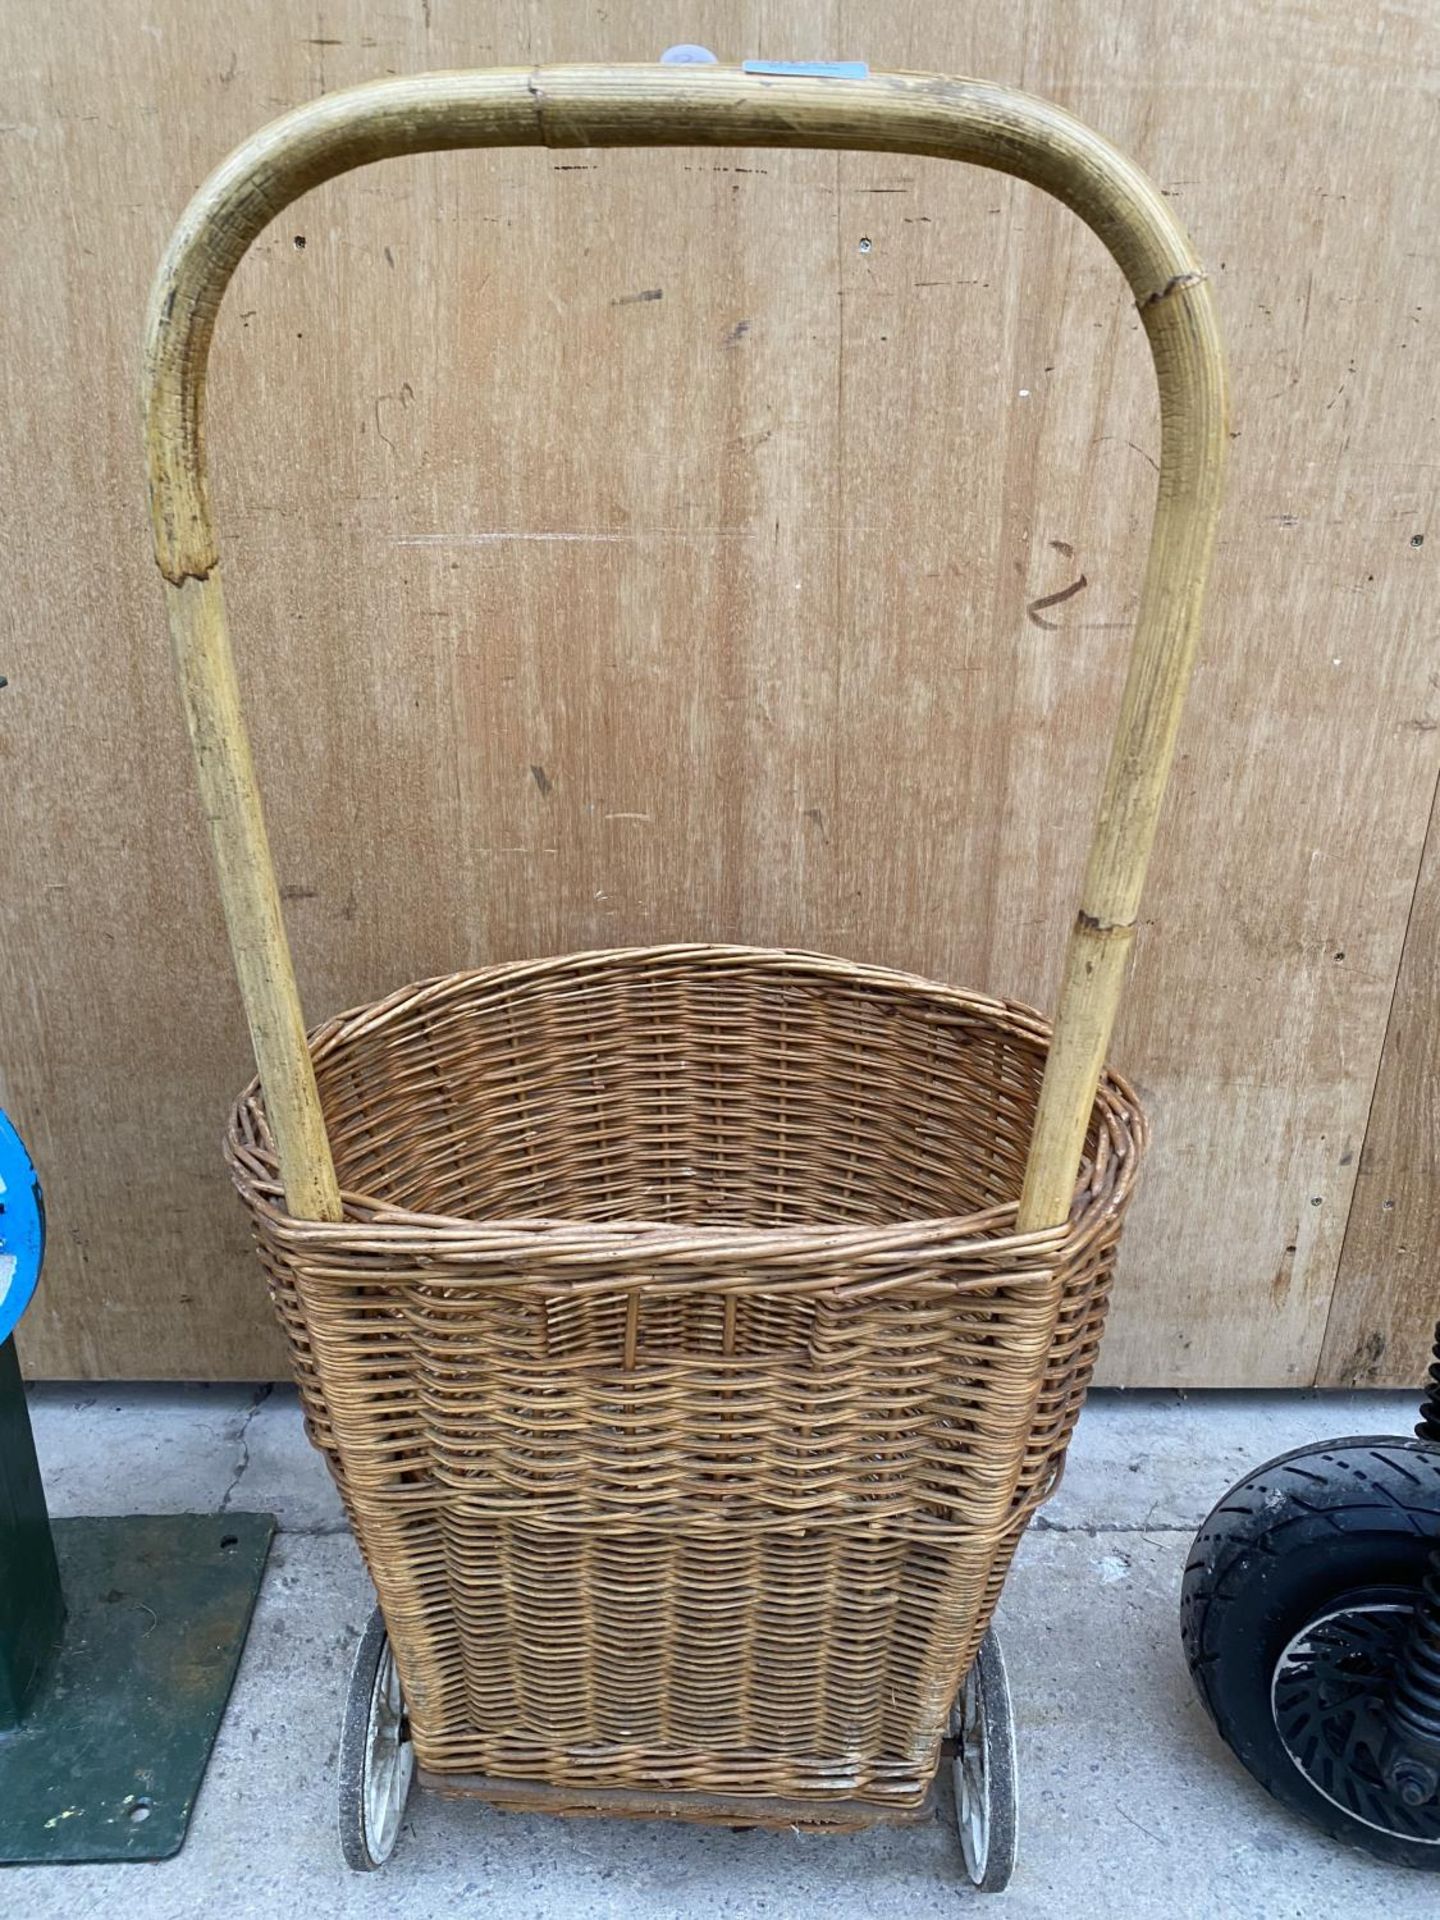 A VINTAGE 1950'S WICKER SHOPPING BASKET - Image 3 of 5